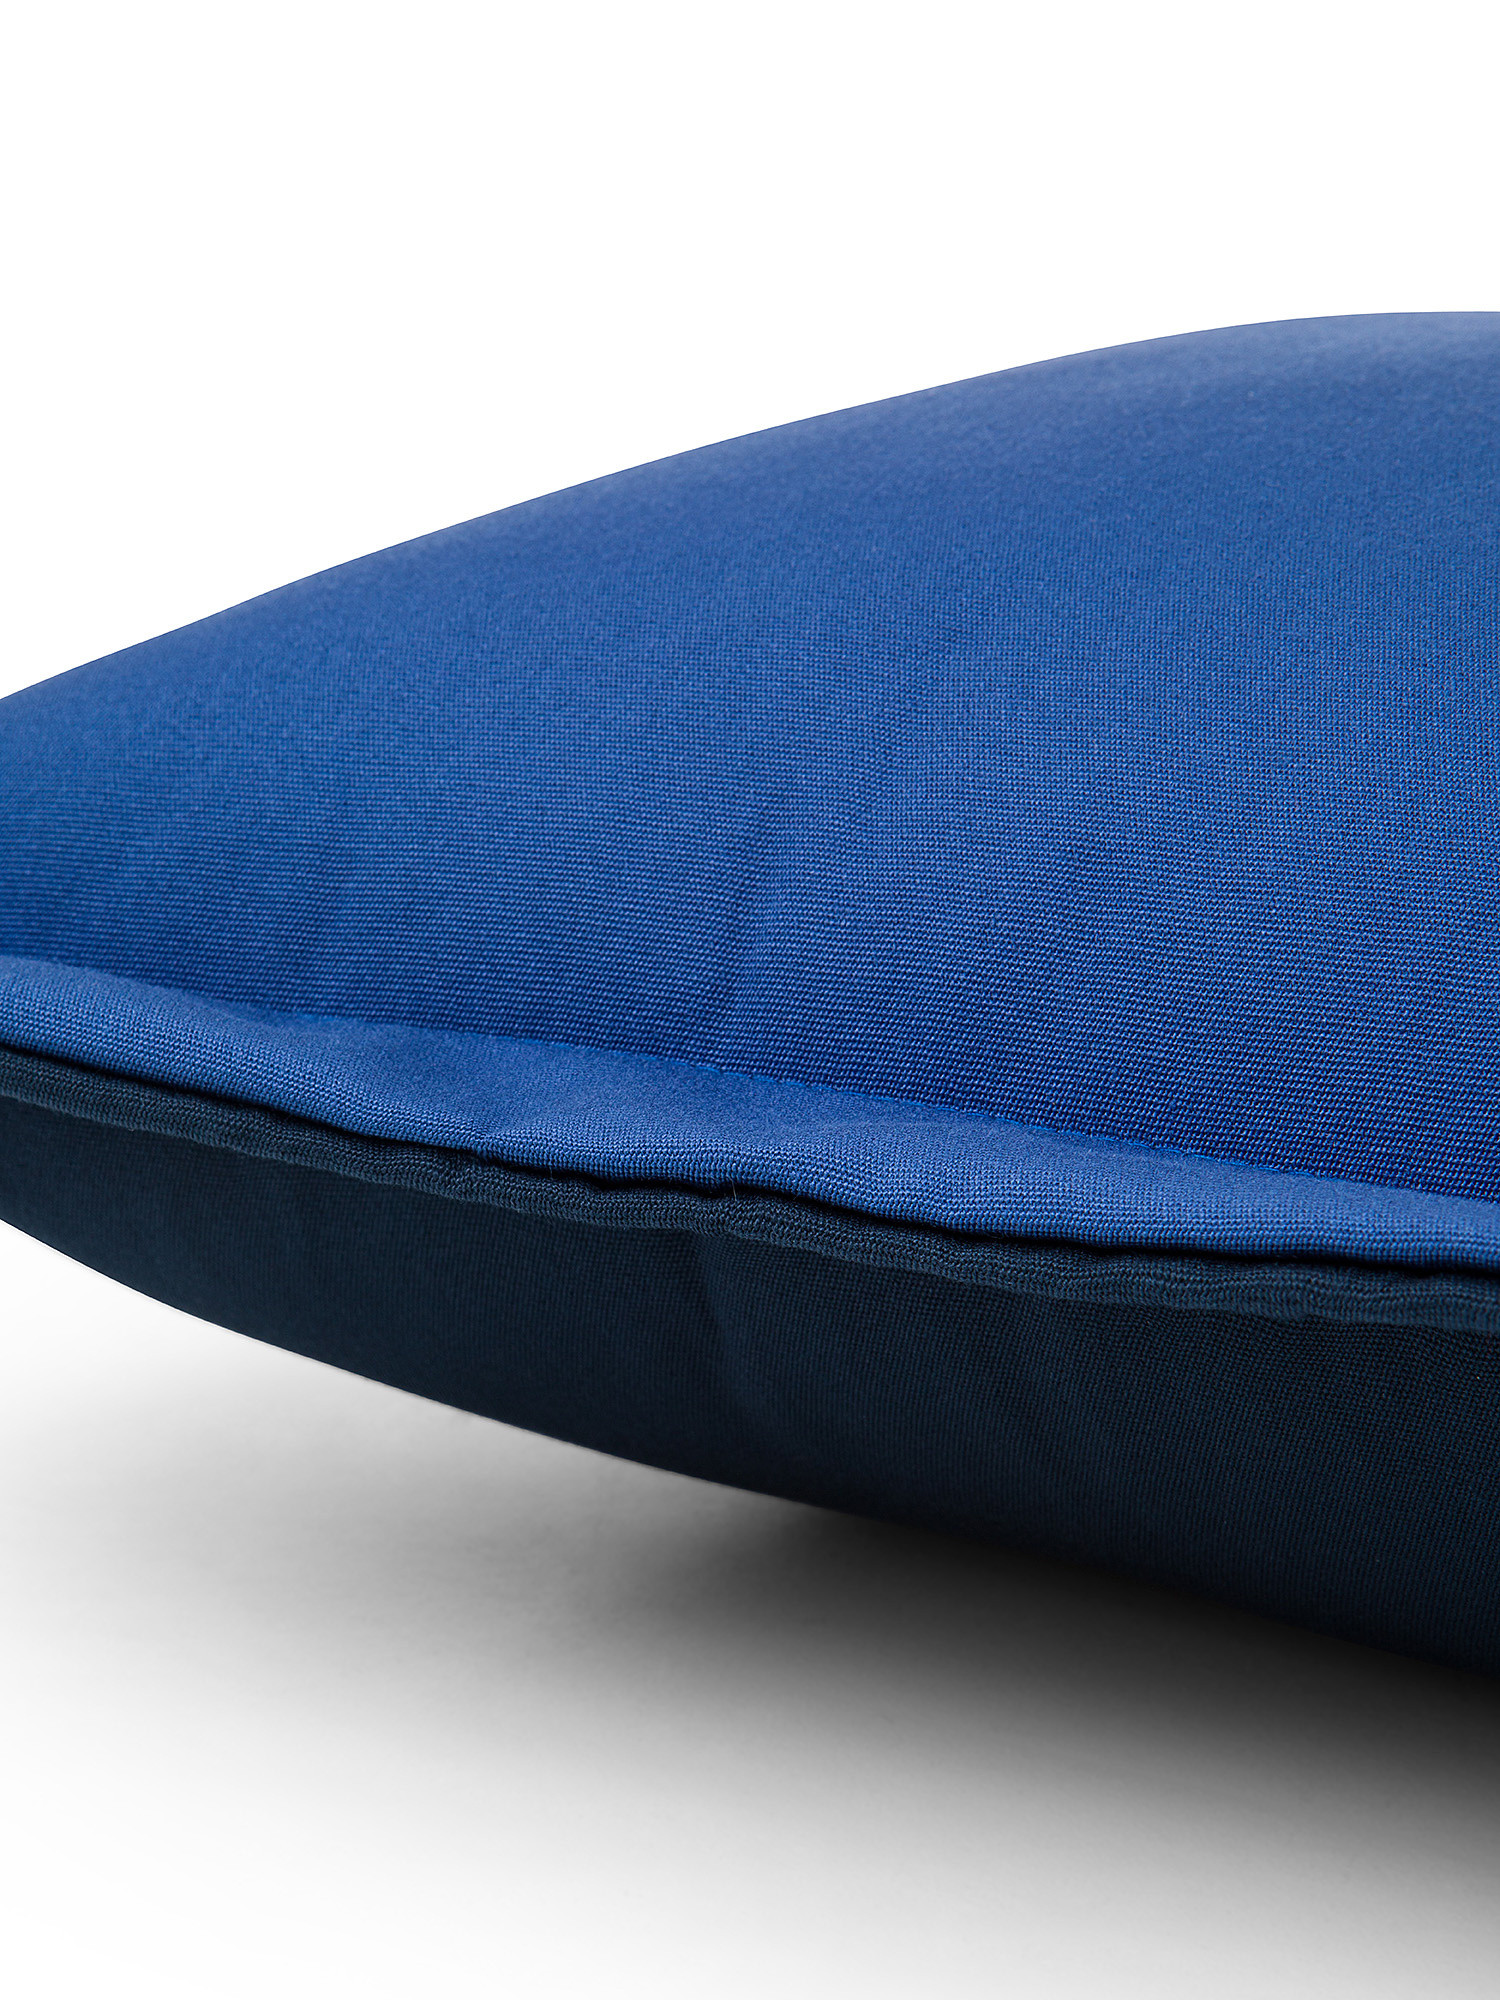 Outdoor cushion in double color fabric 45x45cm, Blue, large image number 2